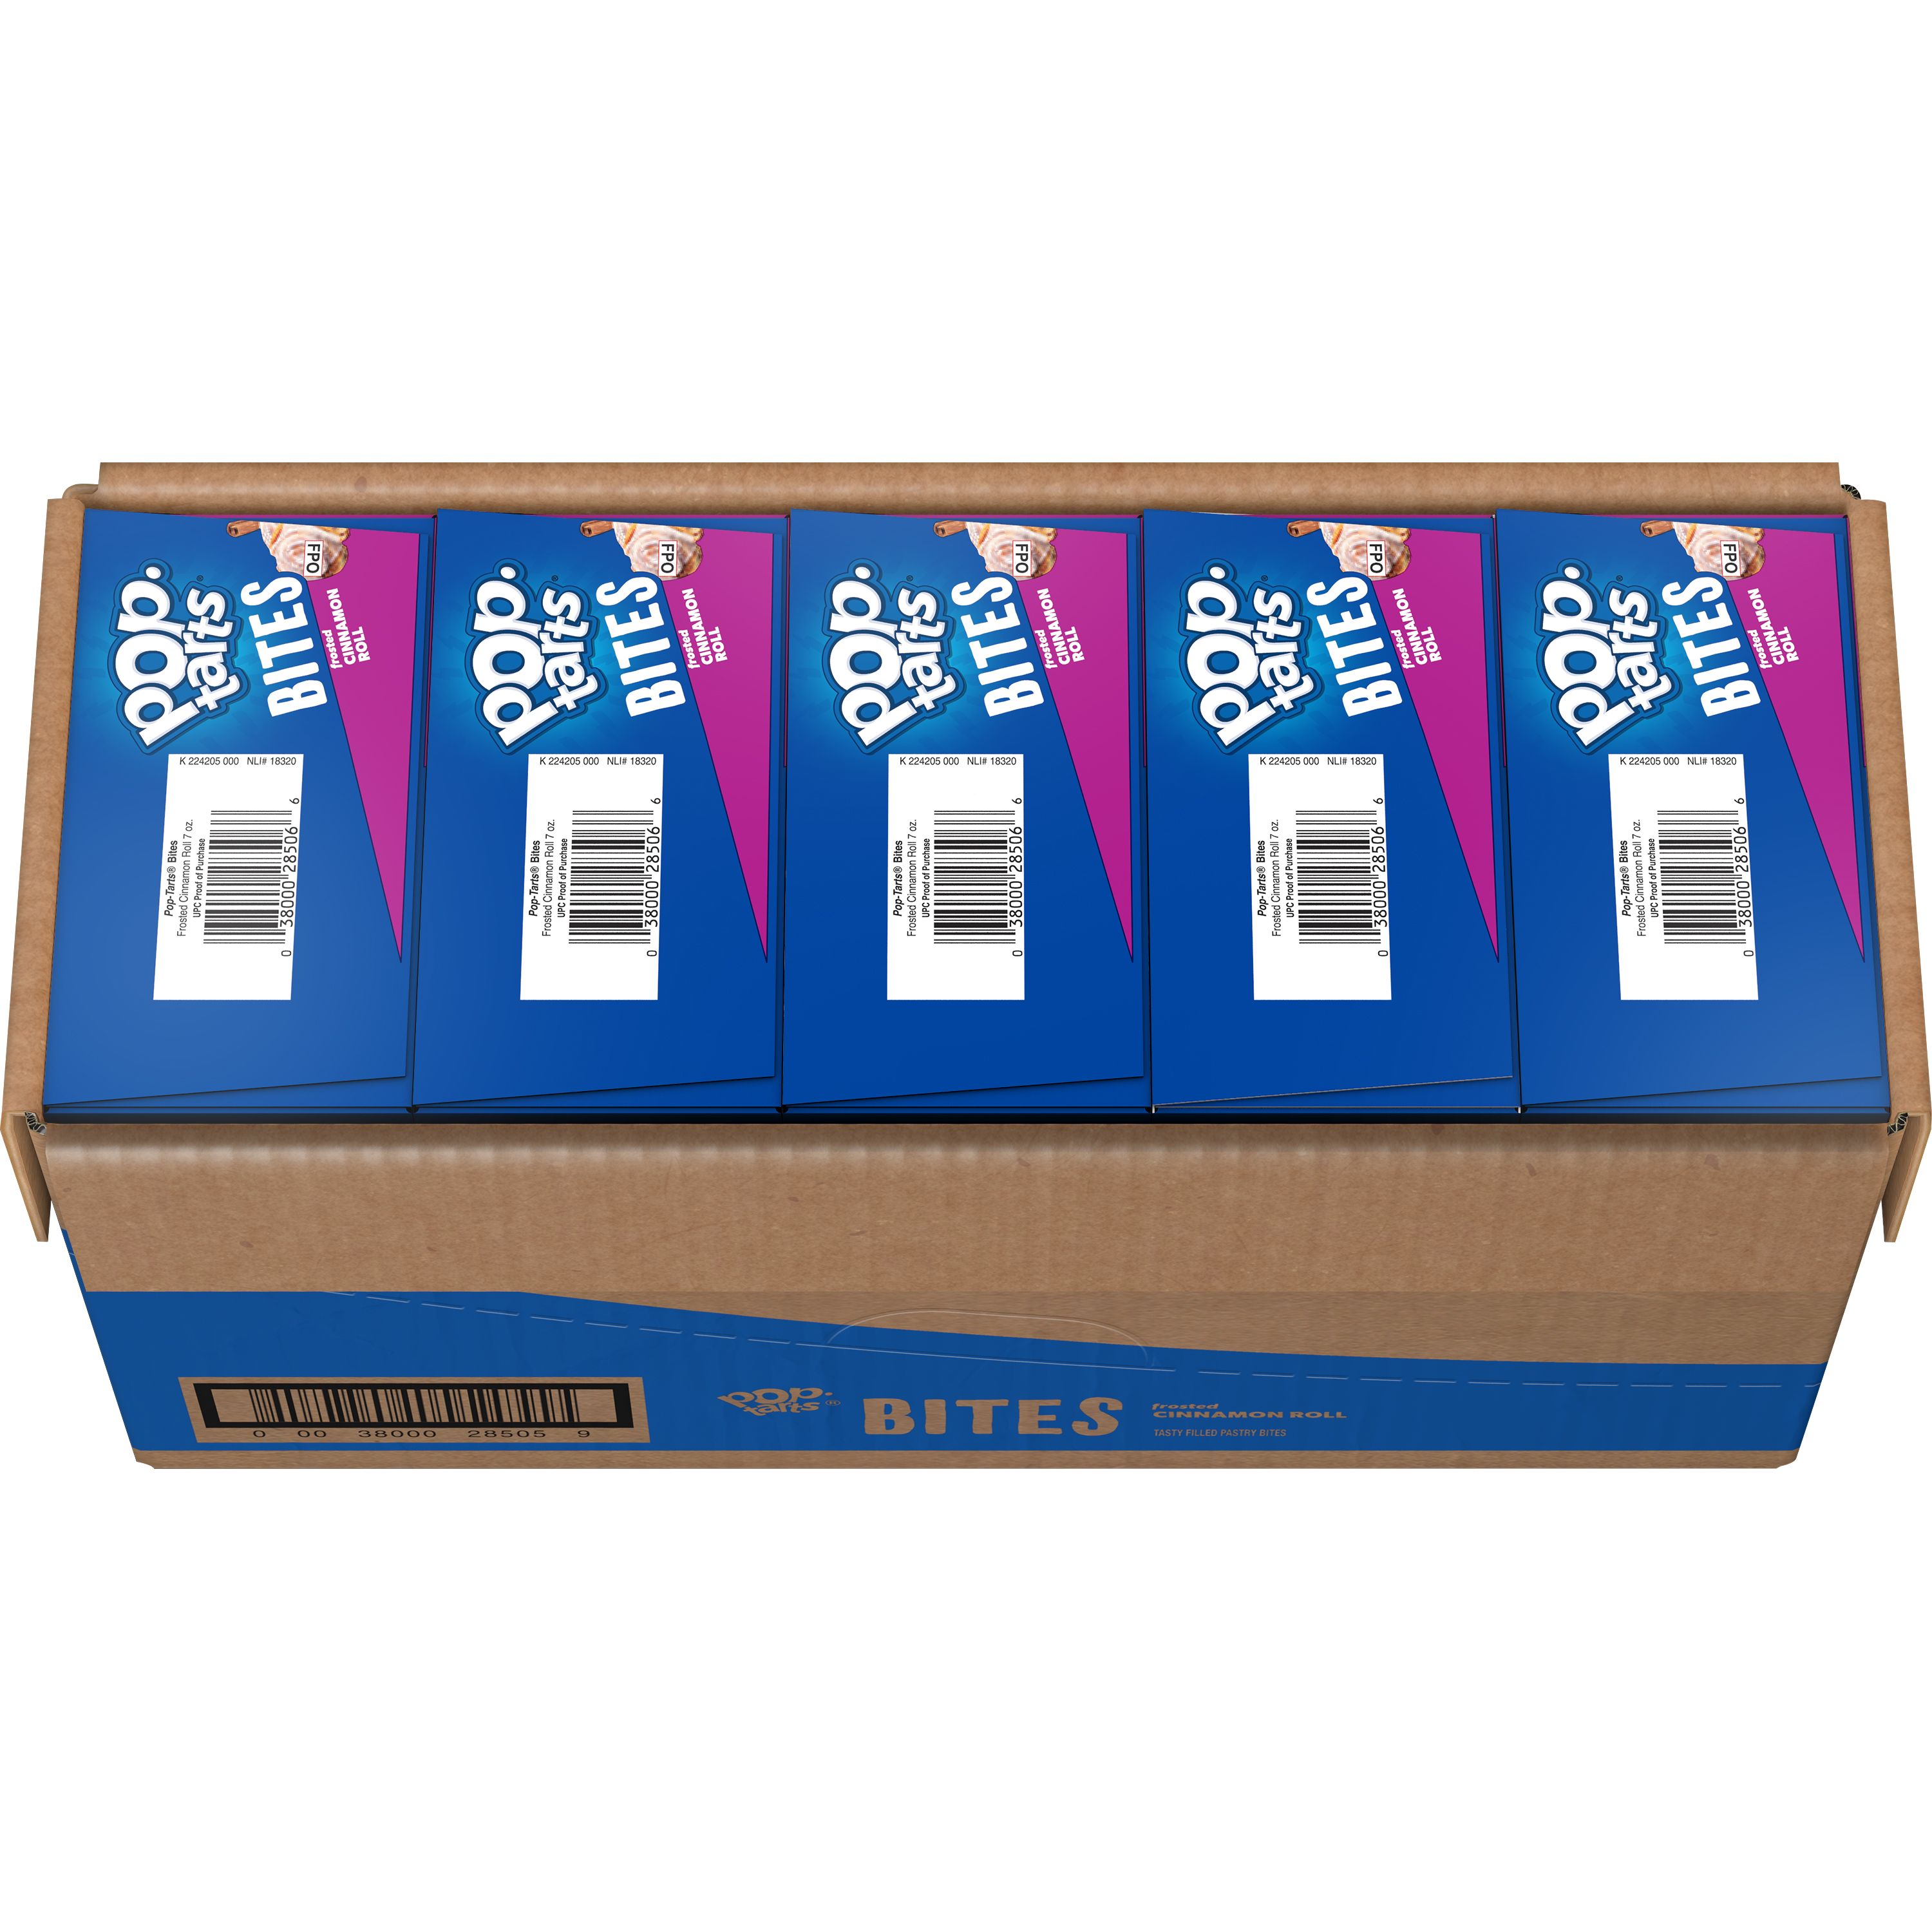 Frosted Cinnamon Roll Pop-Tarts® Bites product image thumbnail 5